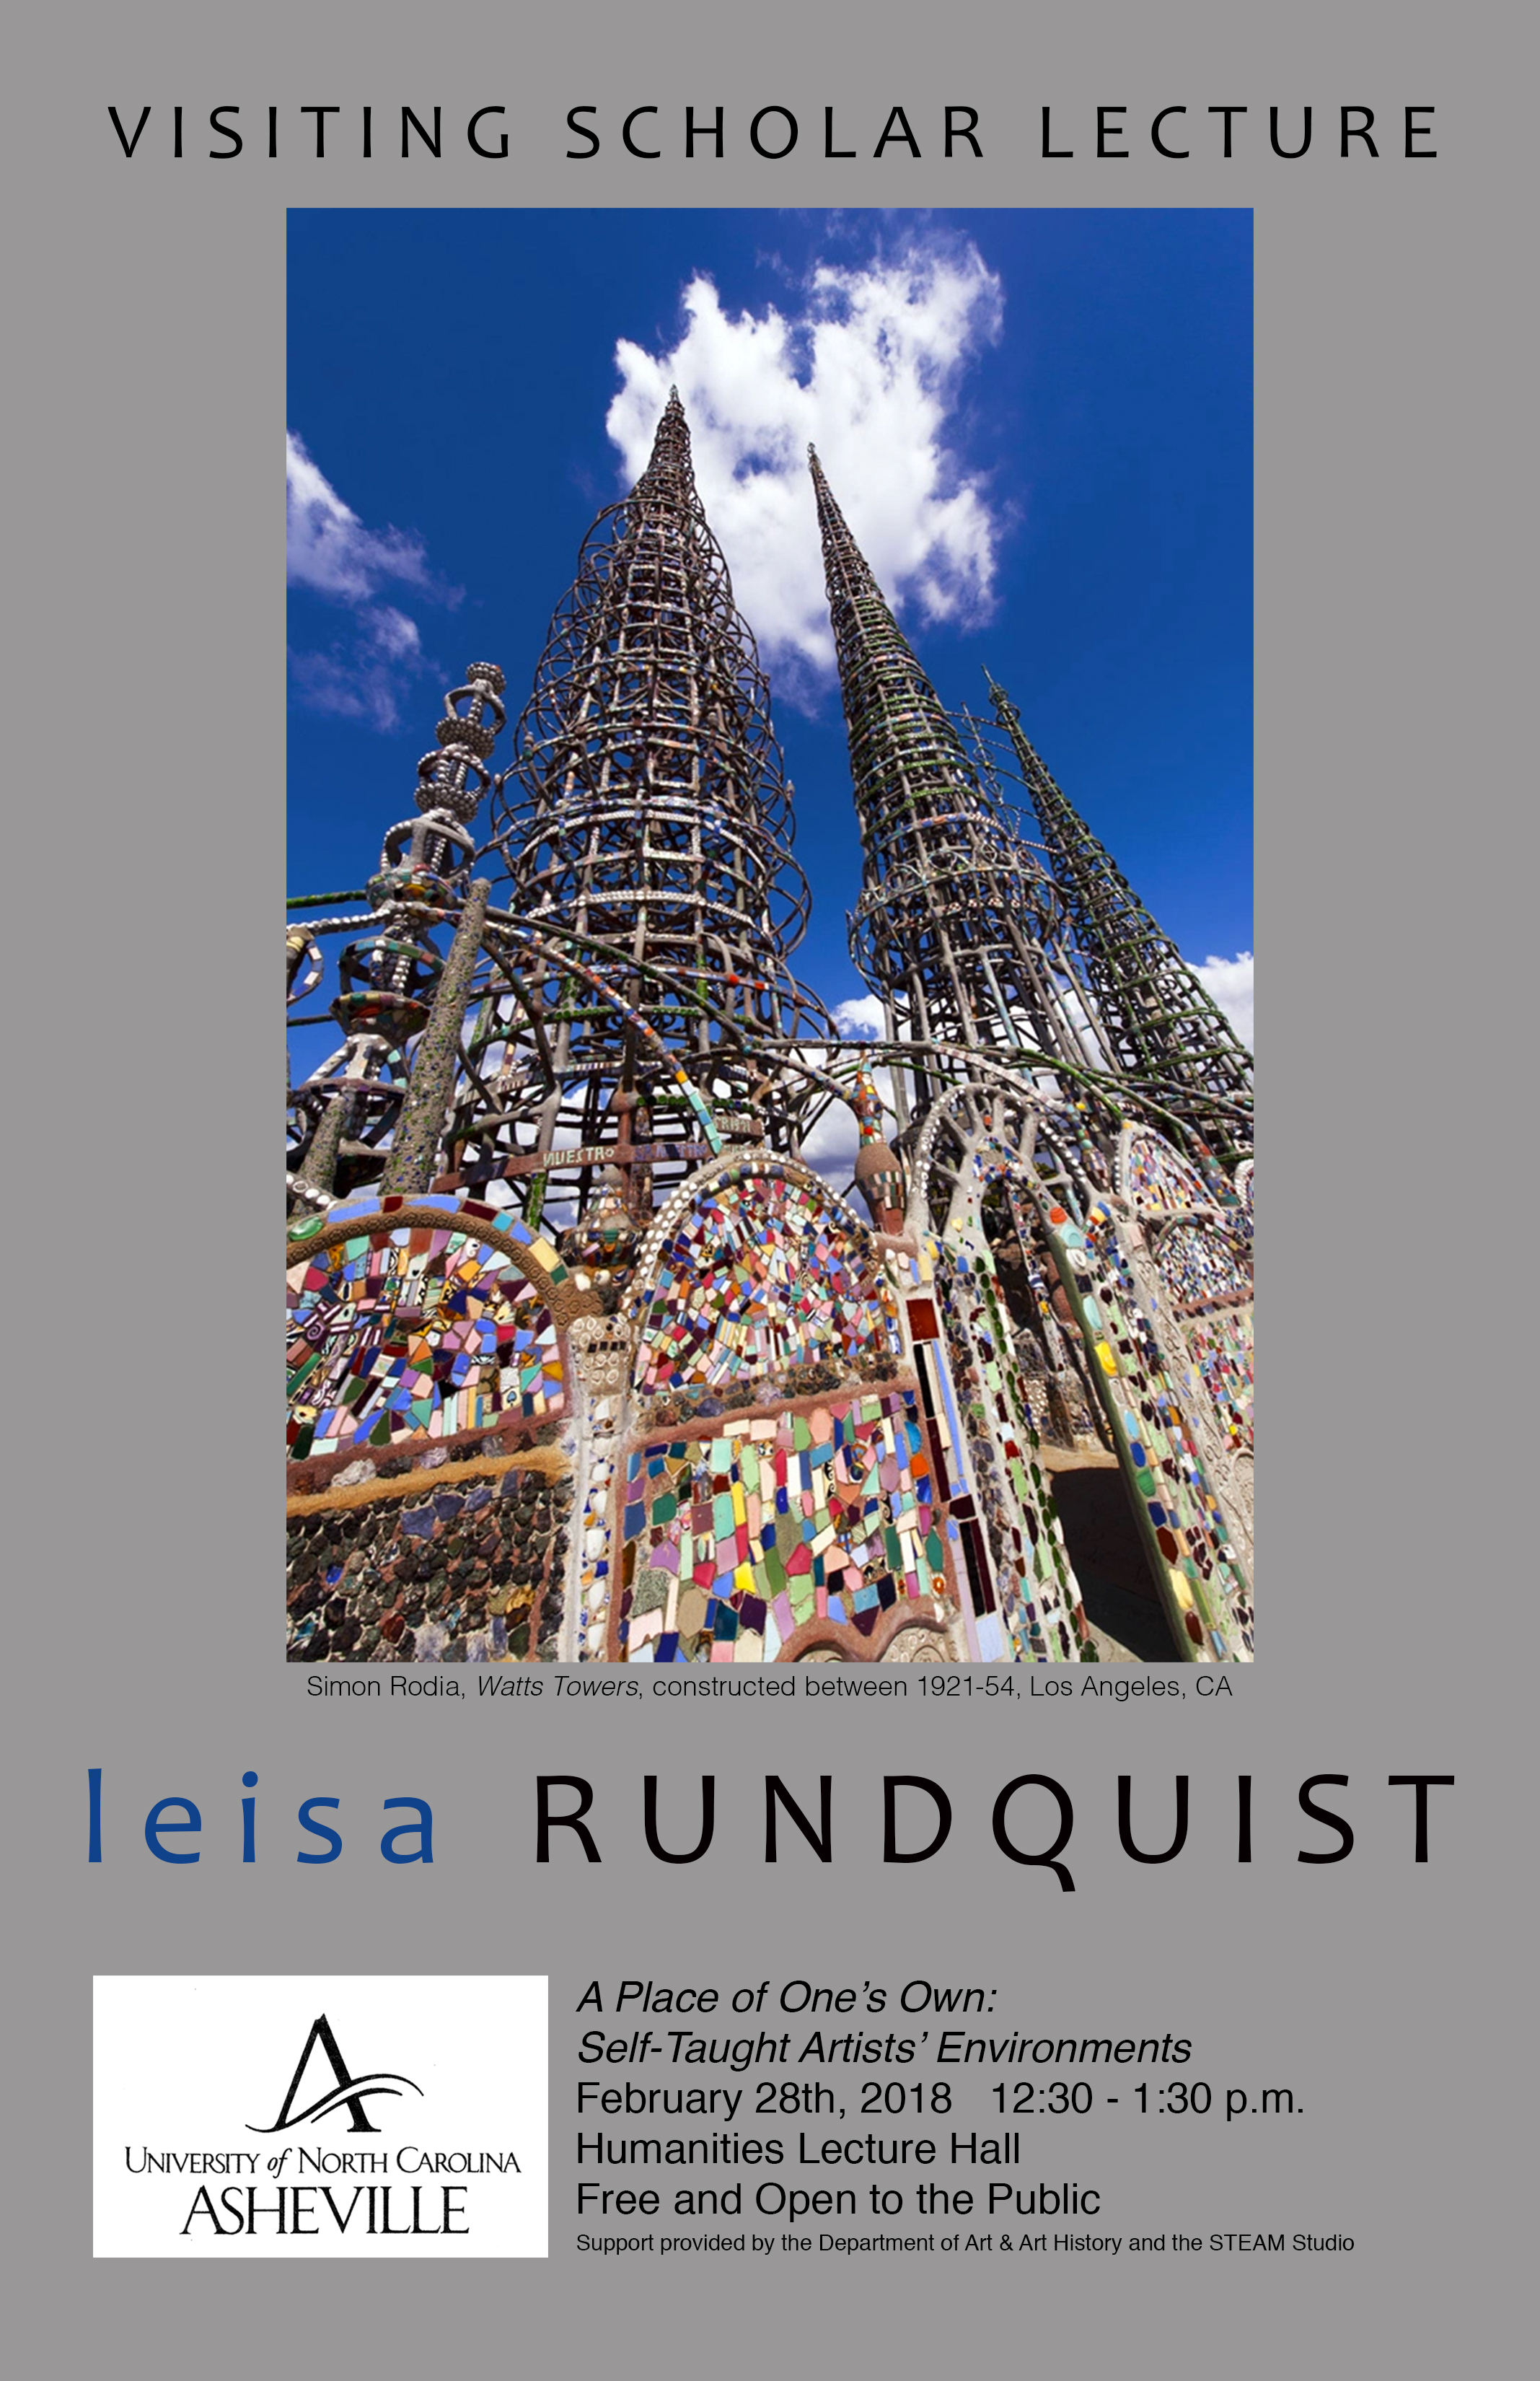 Leisa Rundquist Lecture Poster